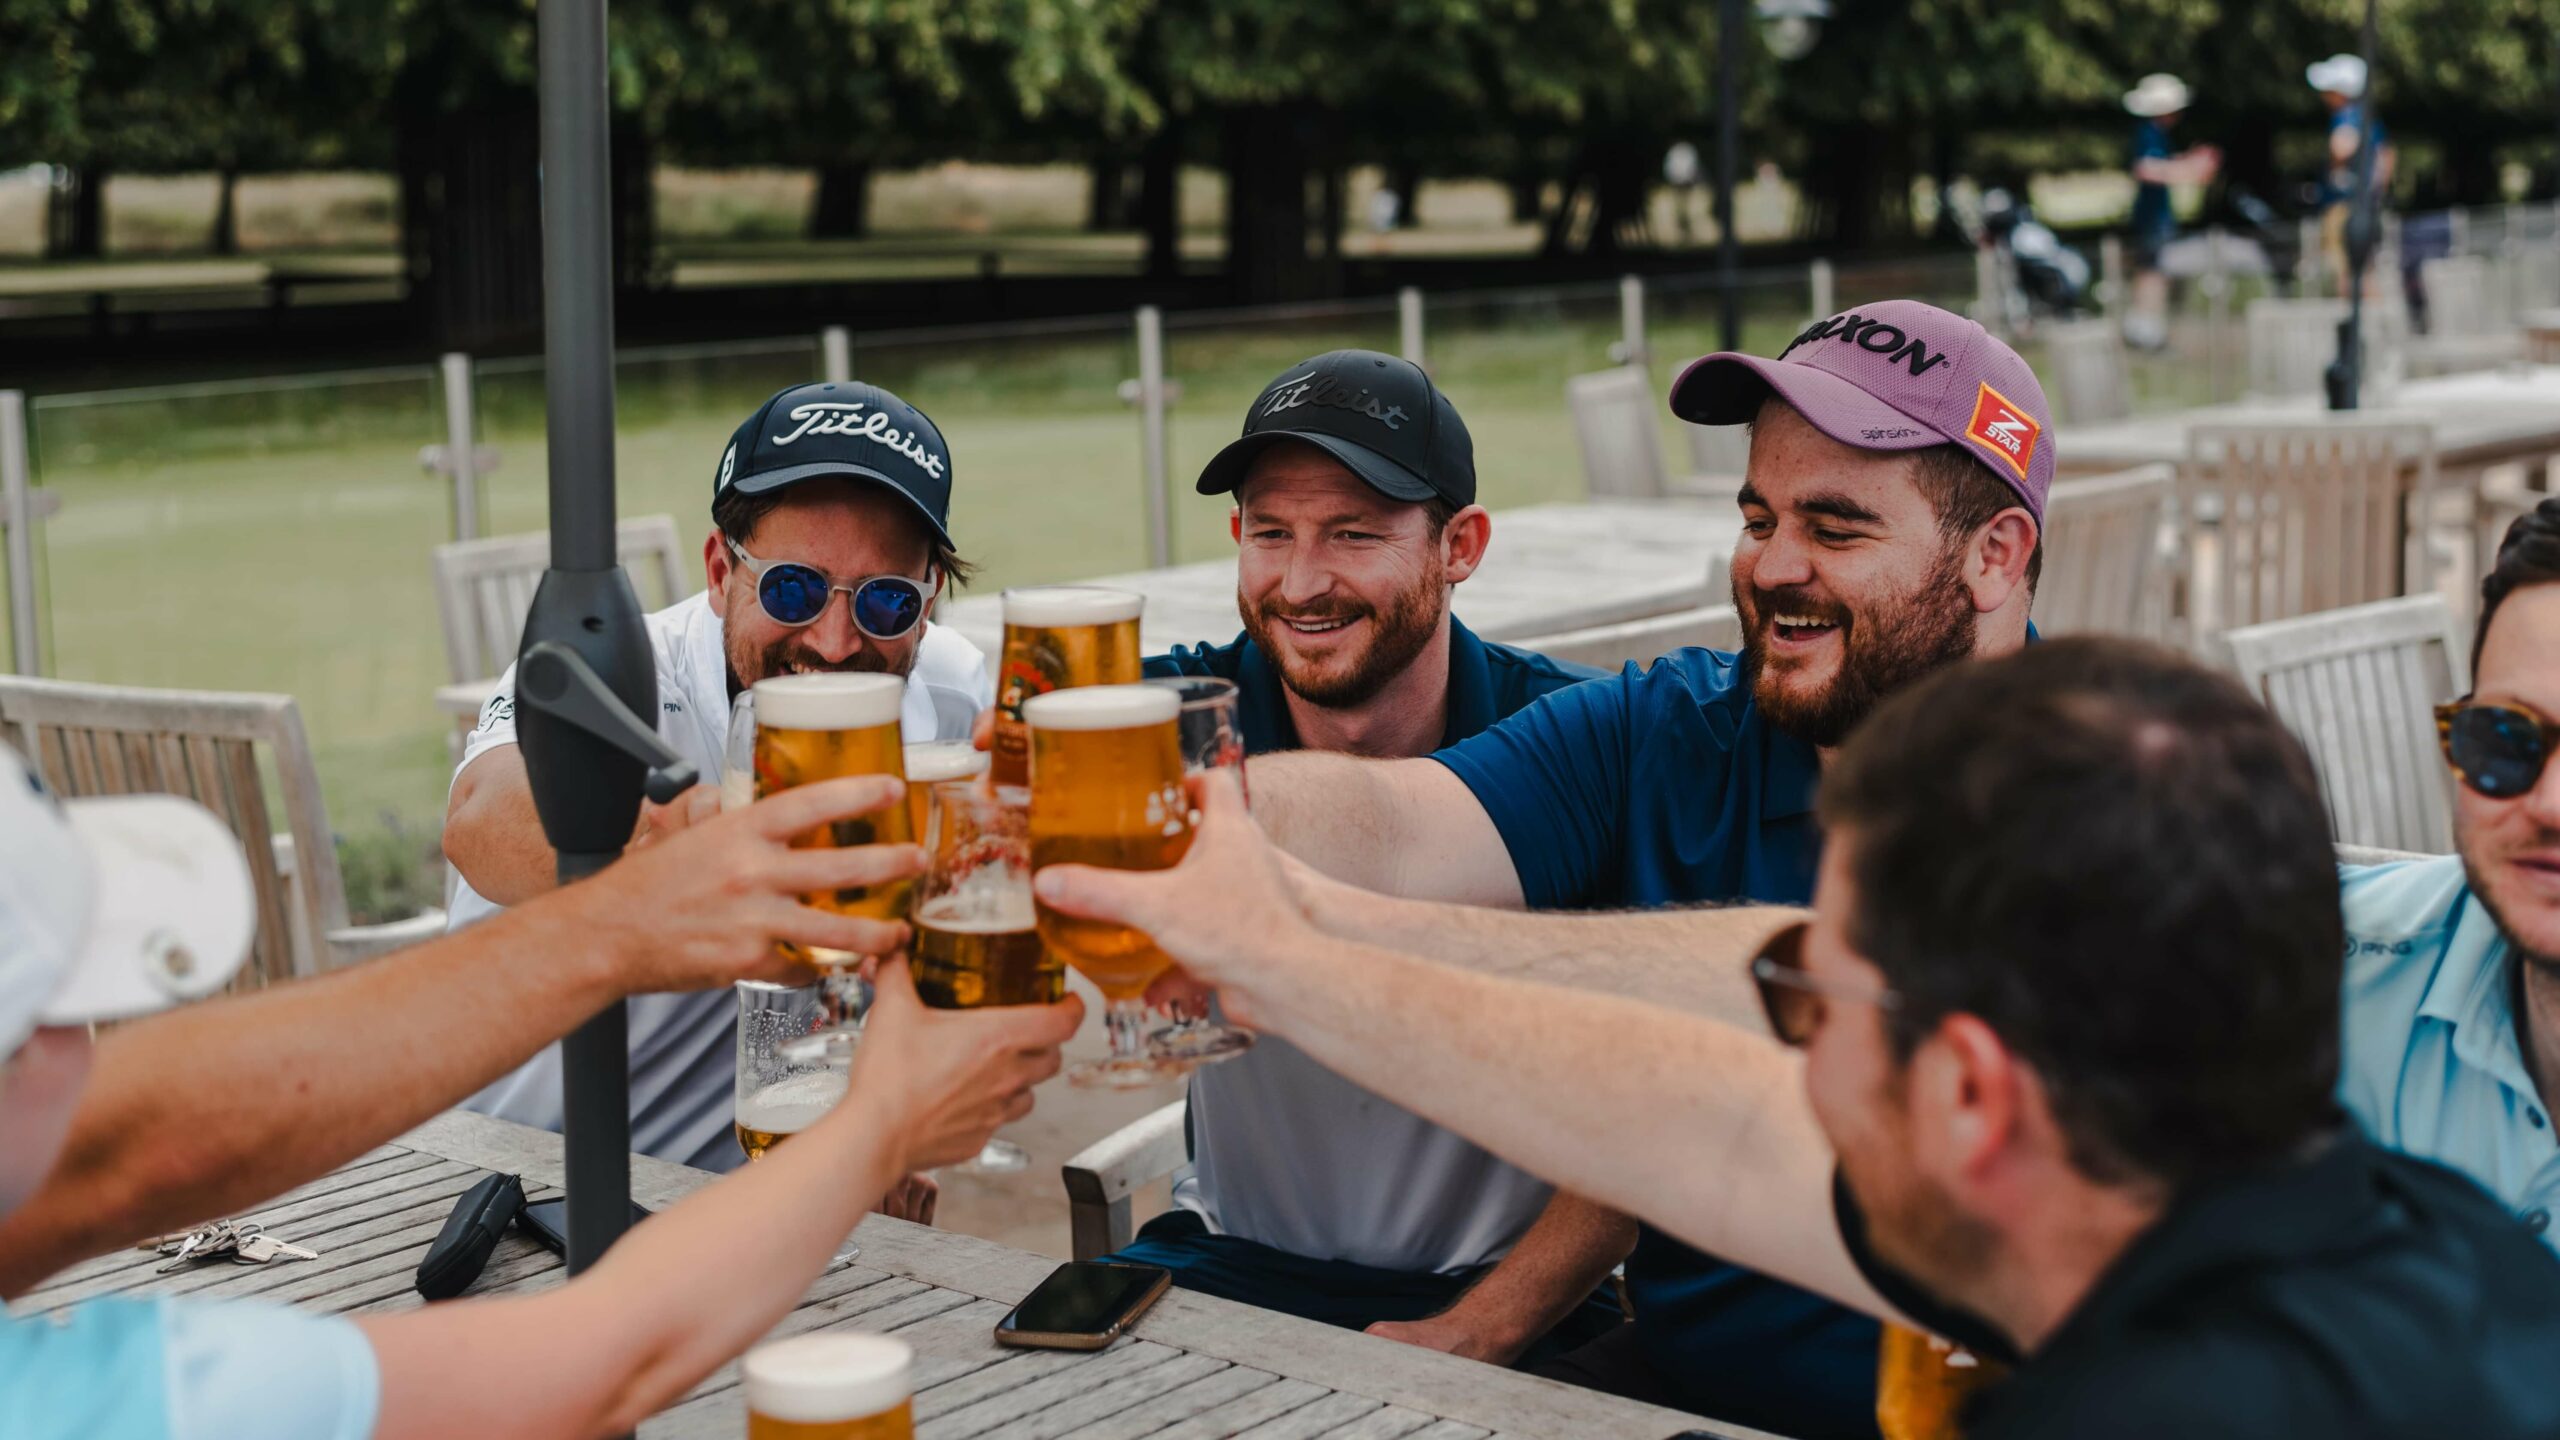 Get Golfing aims to provide a relaxed, inclusive atmosphere at its venues